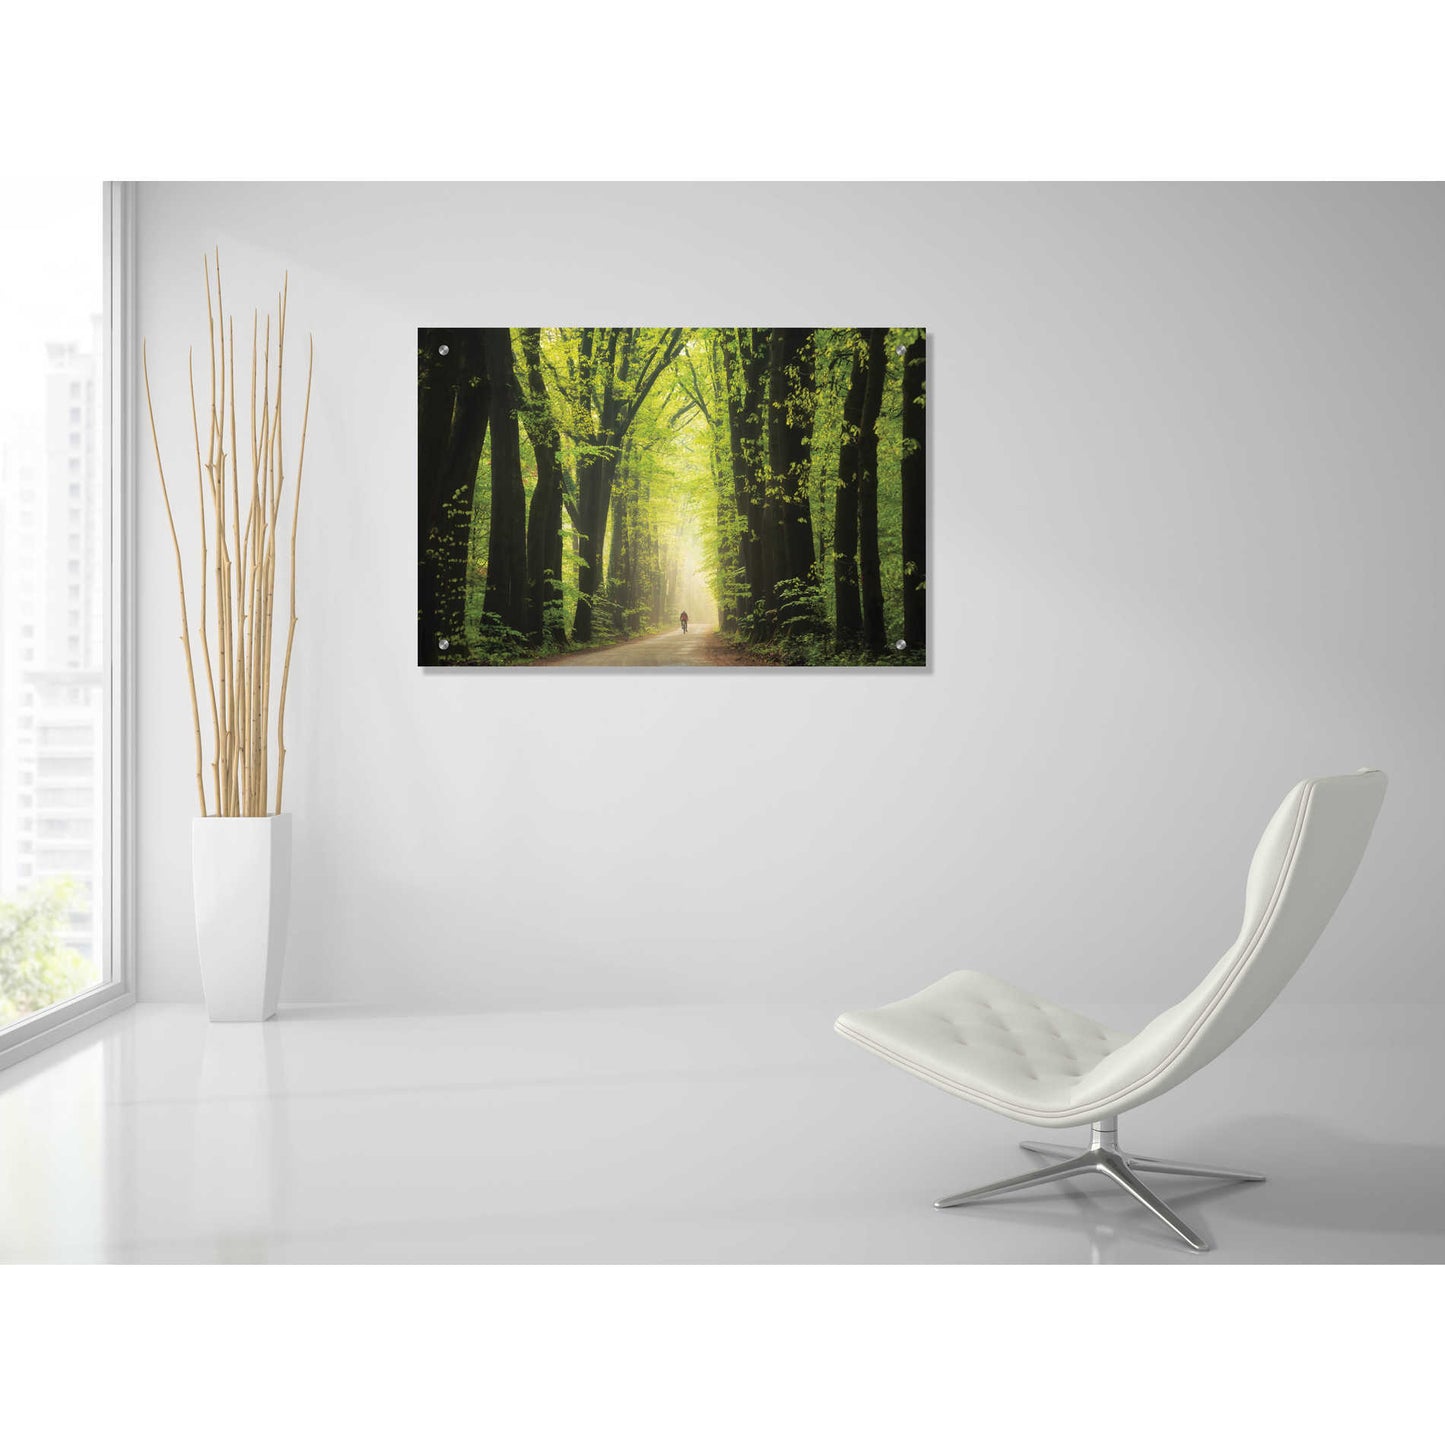 Epic Art 'Among Giants in Springtime' by Martin Podt, Acrylic Glass Wall Art,36x24